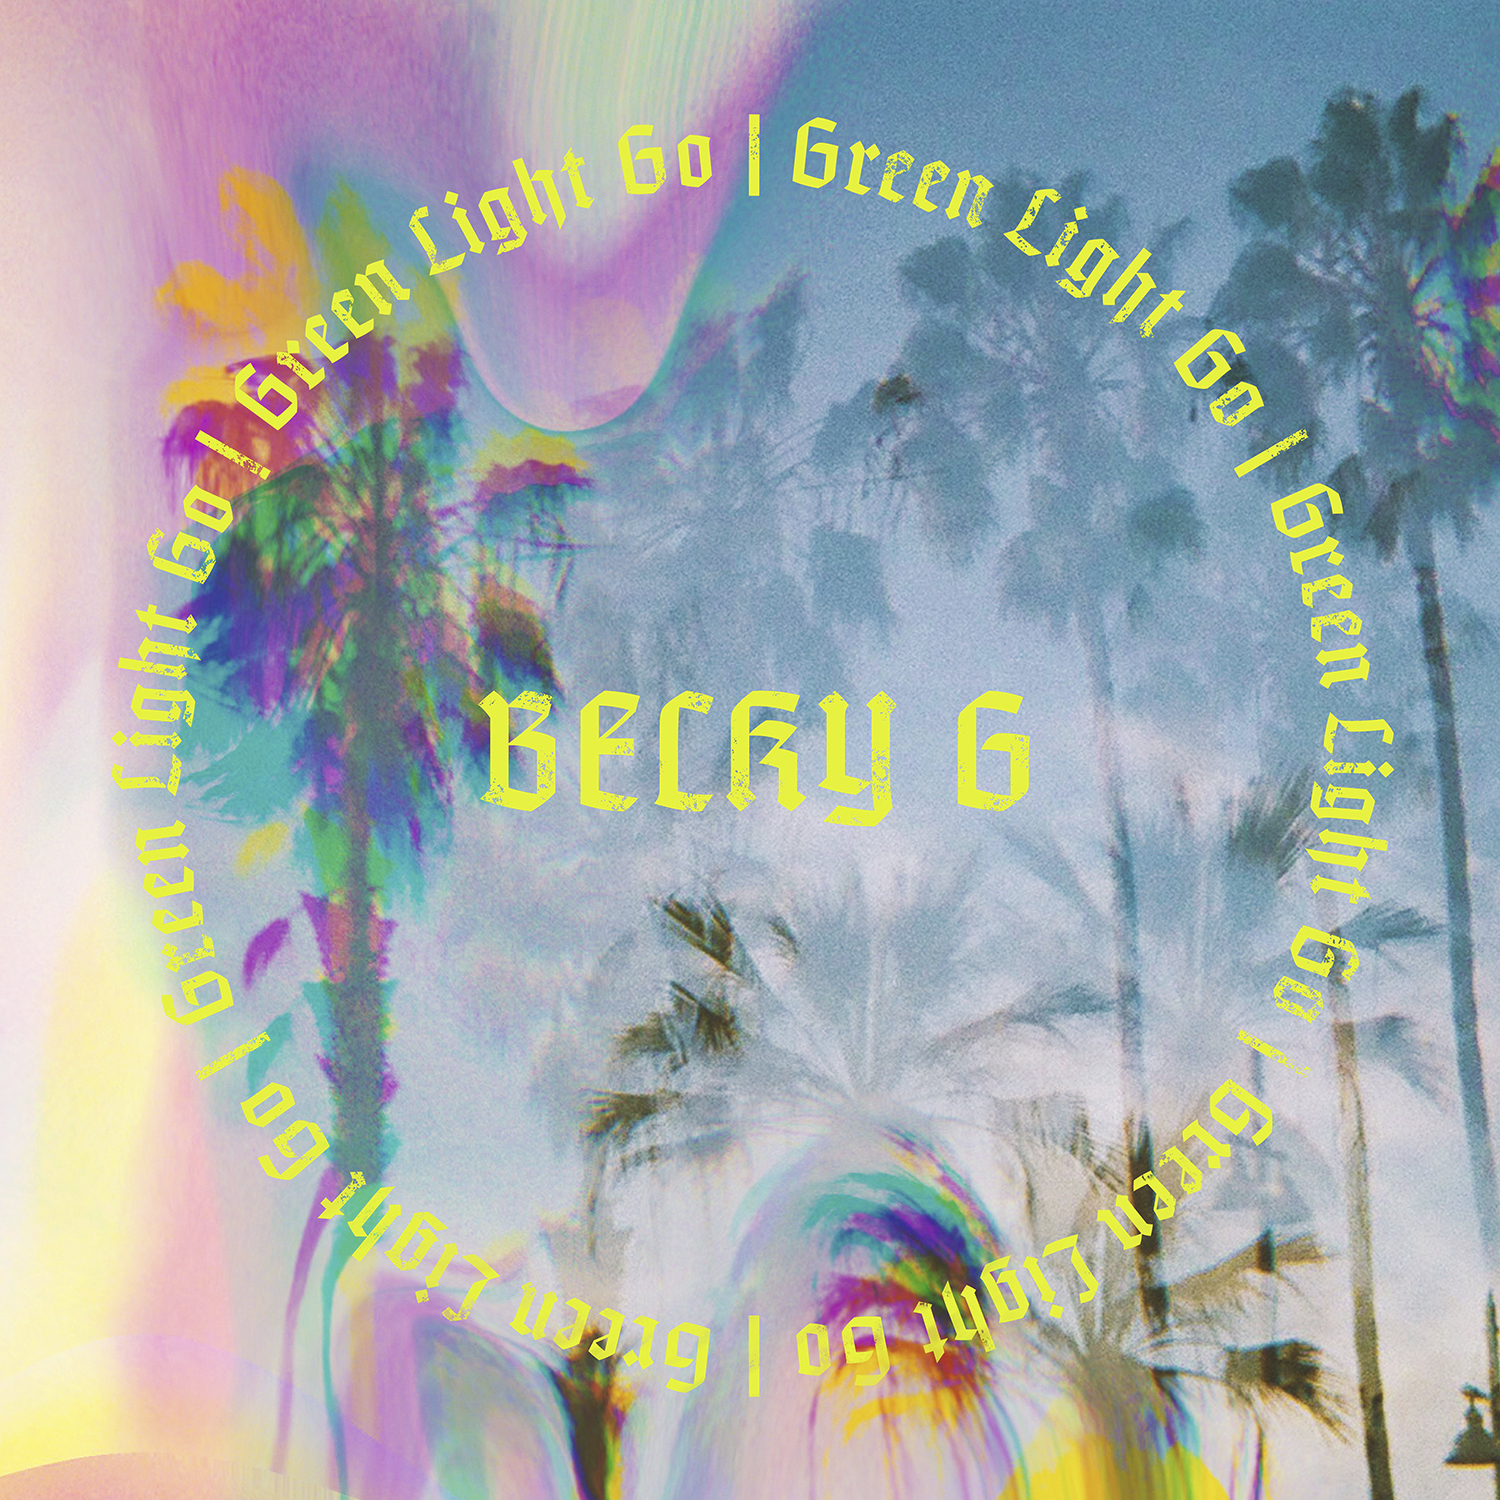 Becky G Releases New Track Green Light Go Rca Records